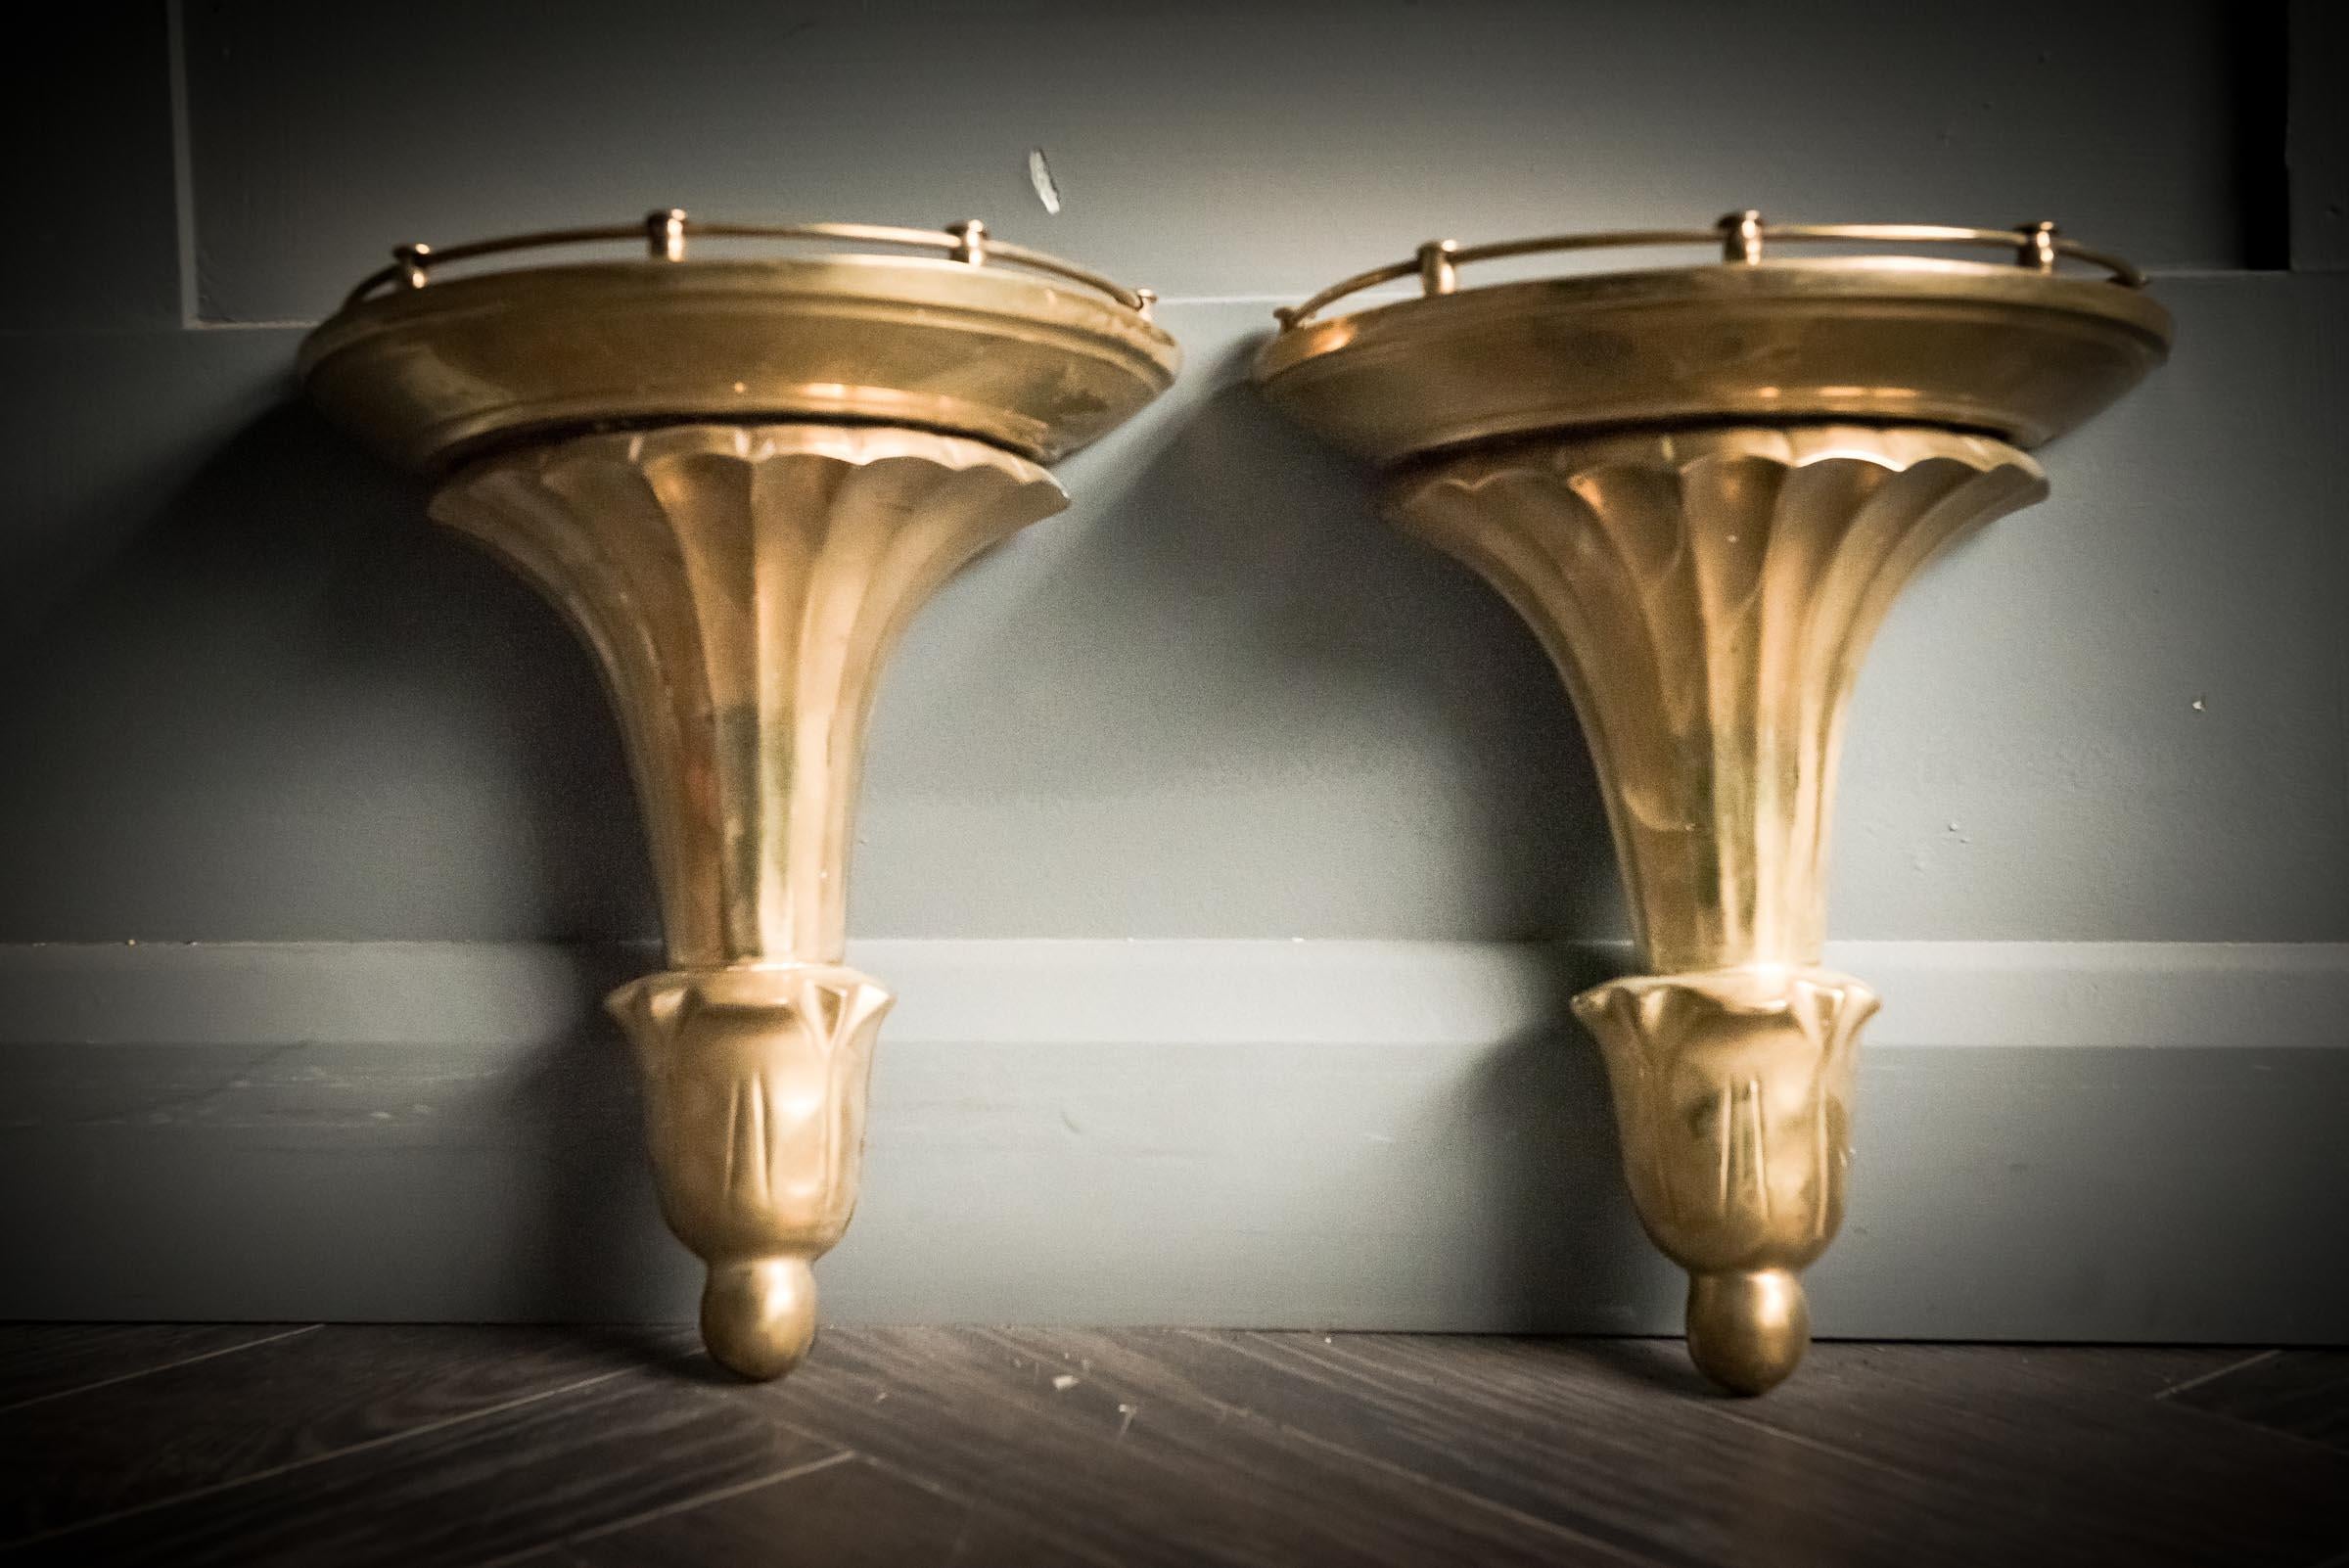 Brass wall sconces Galleried 1920's English.